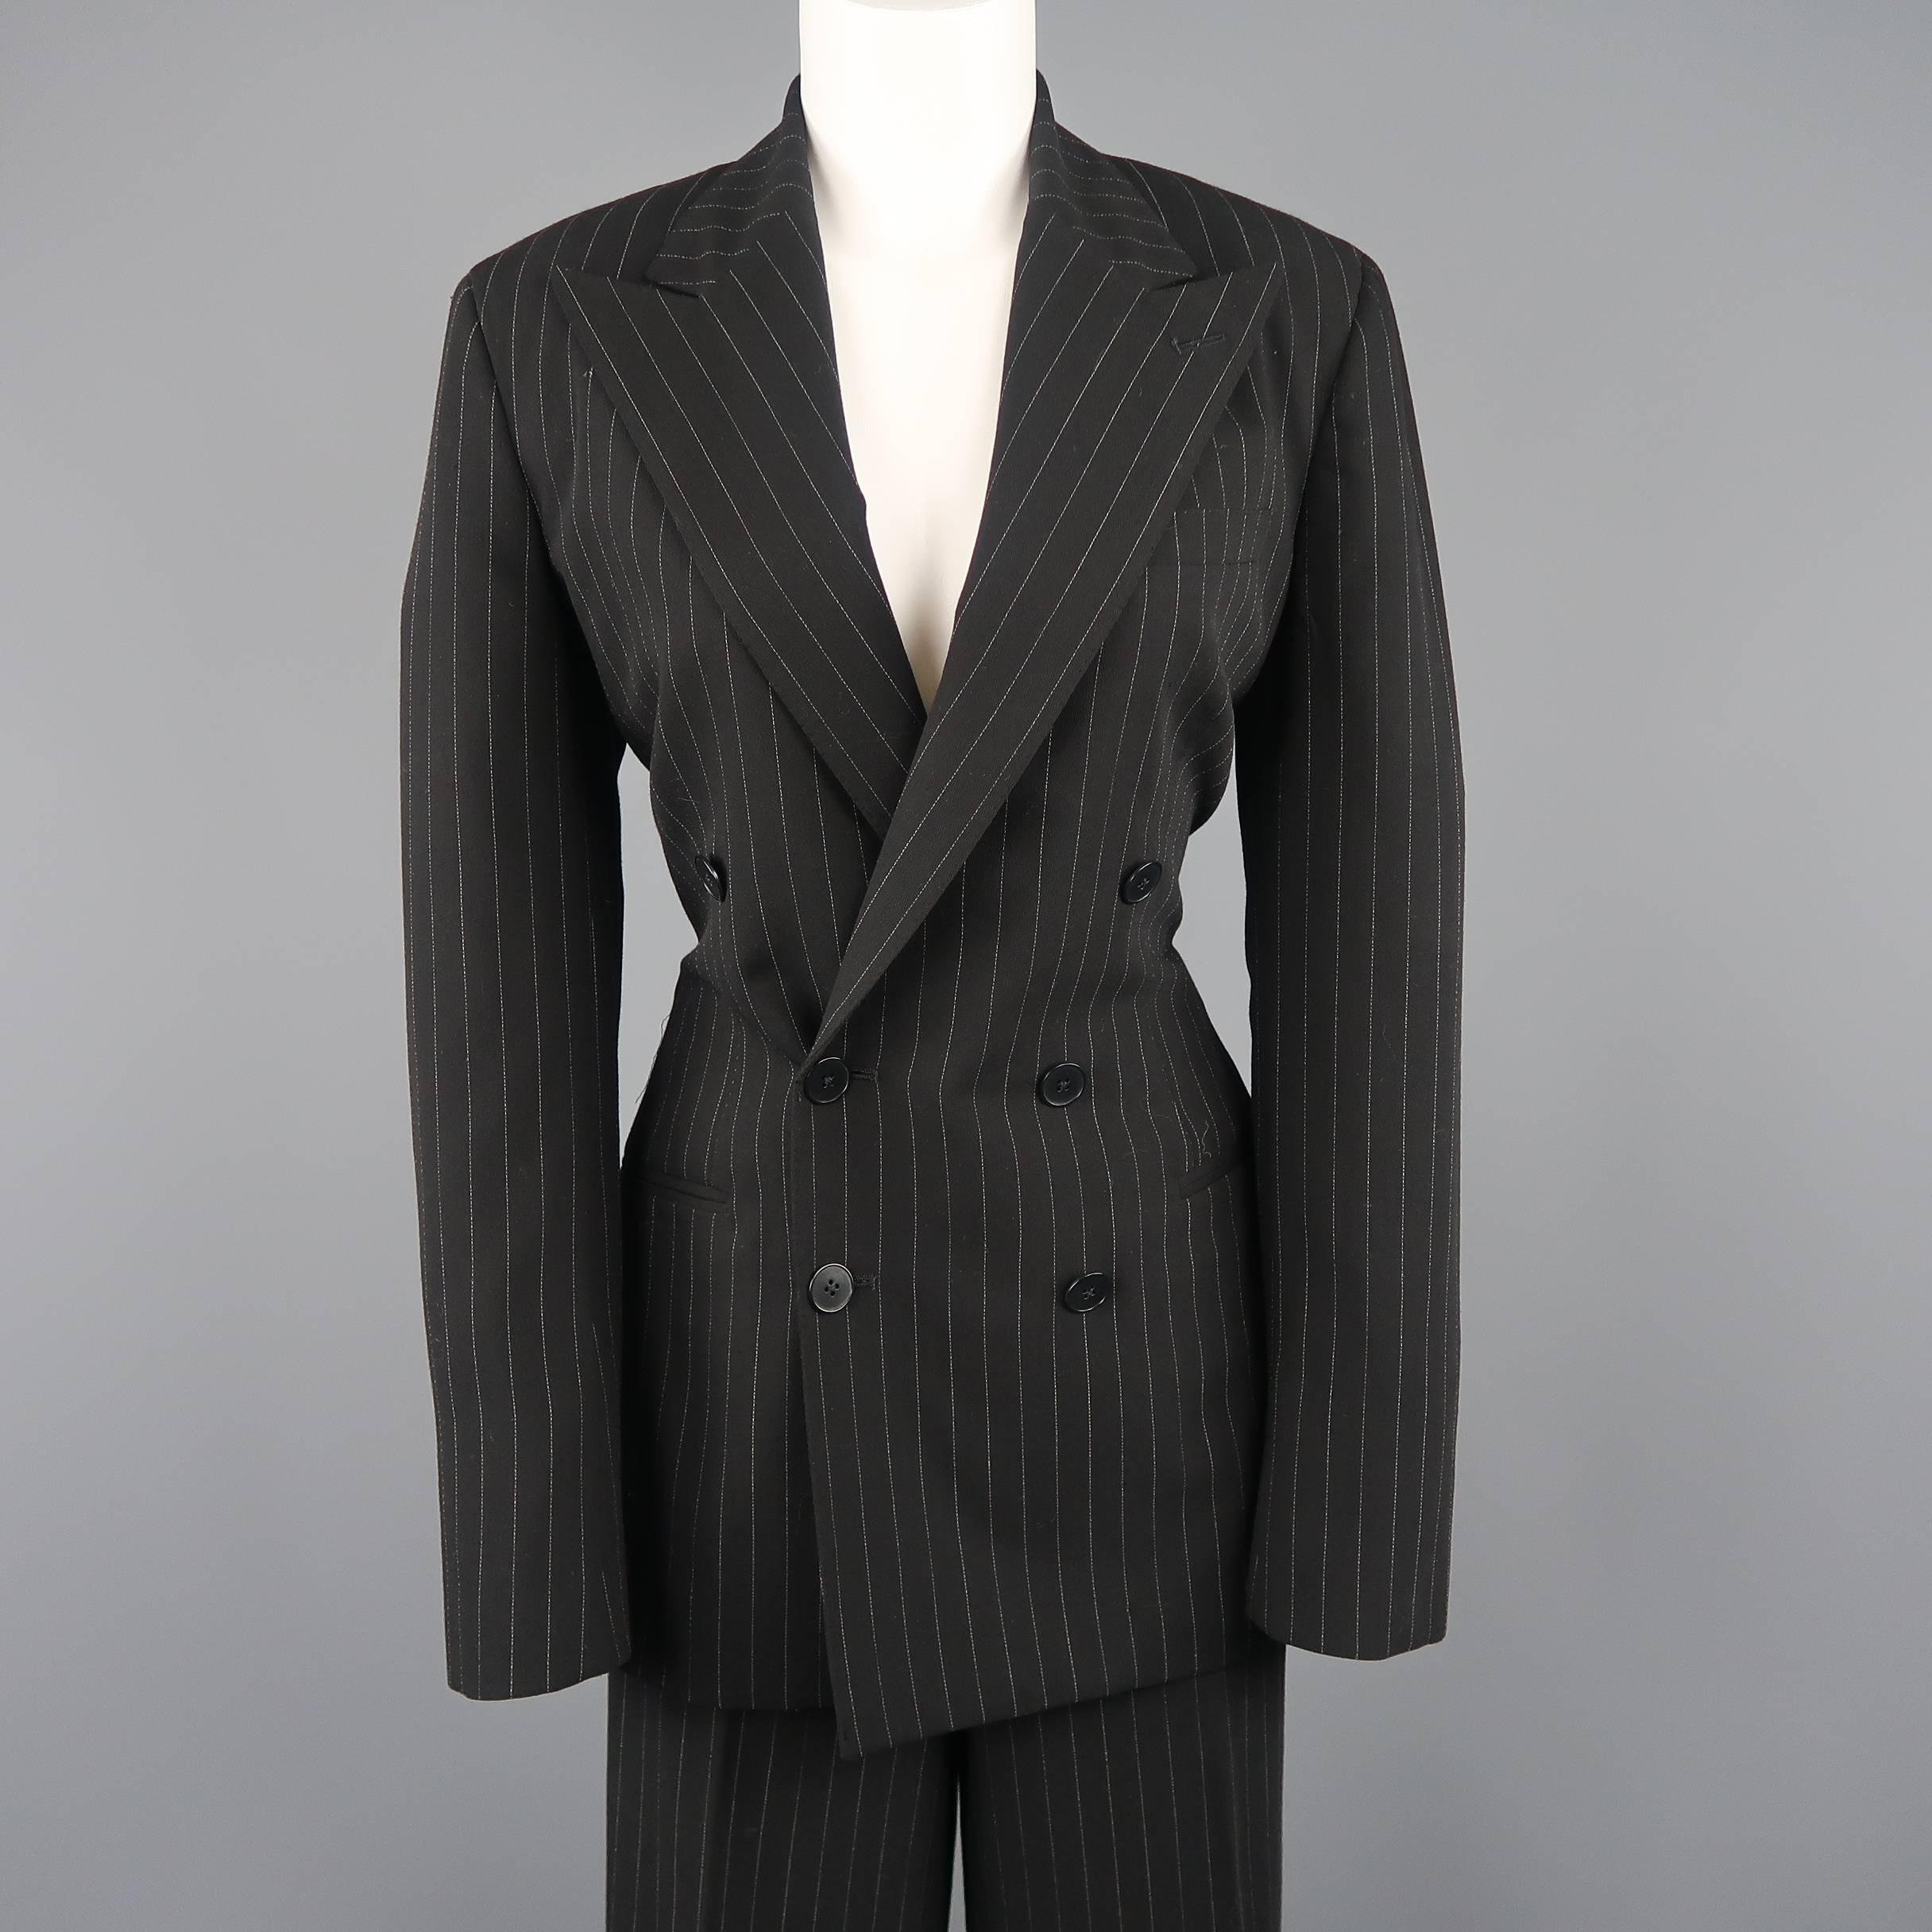 Ralph Lauren Collection suit comes in black pinstripe wool and includes a double breasted, peak lapel jacket and matching high rise, flat front, wide leg trousers with a back belt. Made in USA.
 
Excellent Pre-Owned Condition.
Marked: 8
